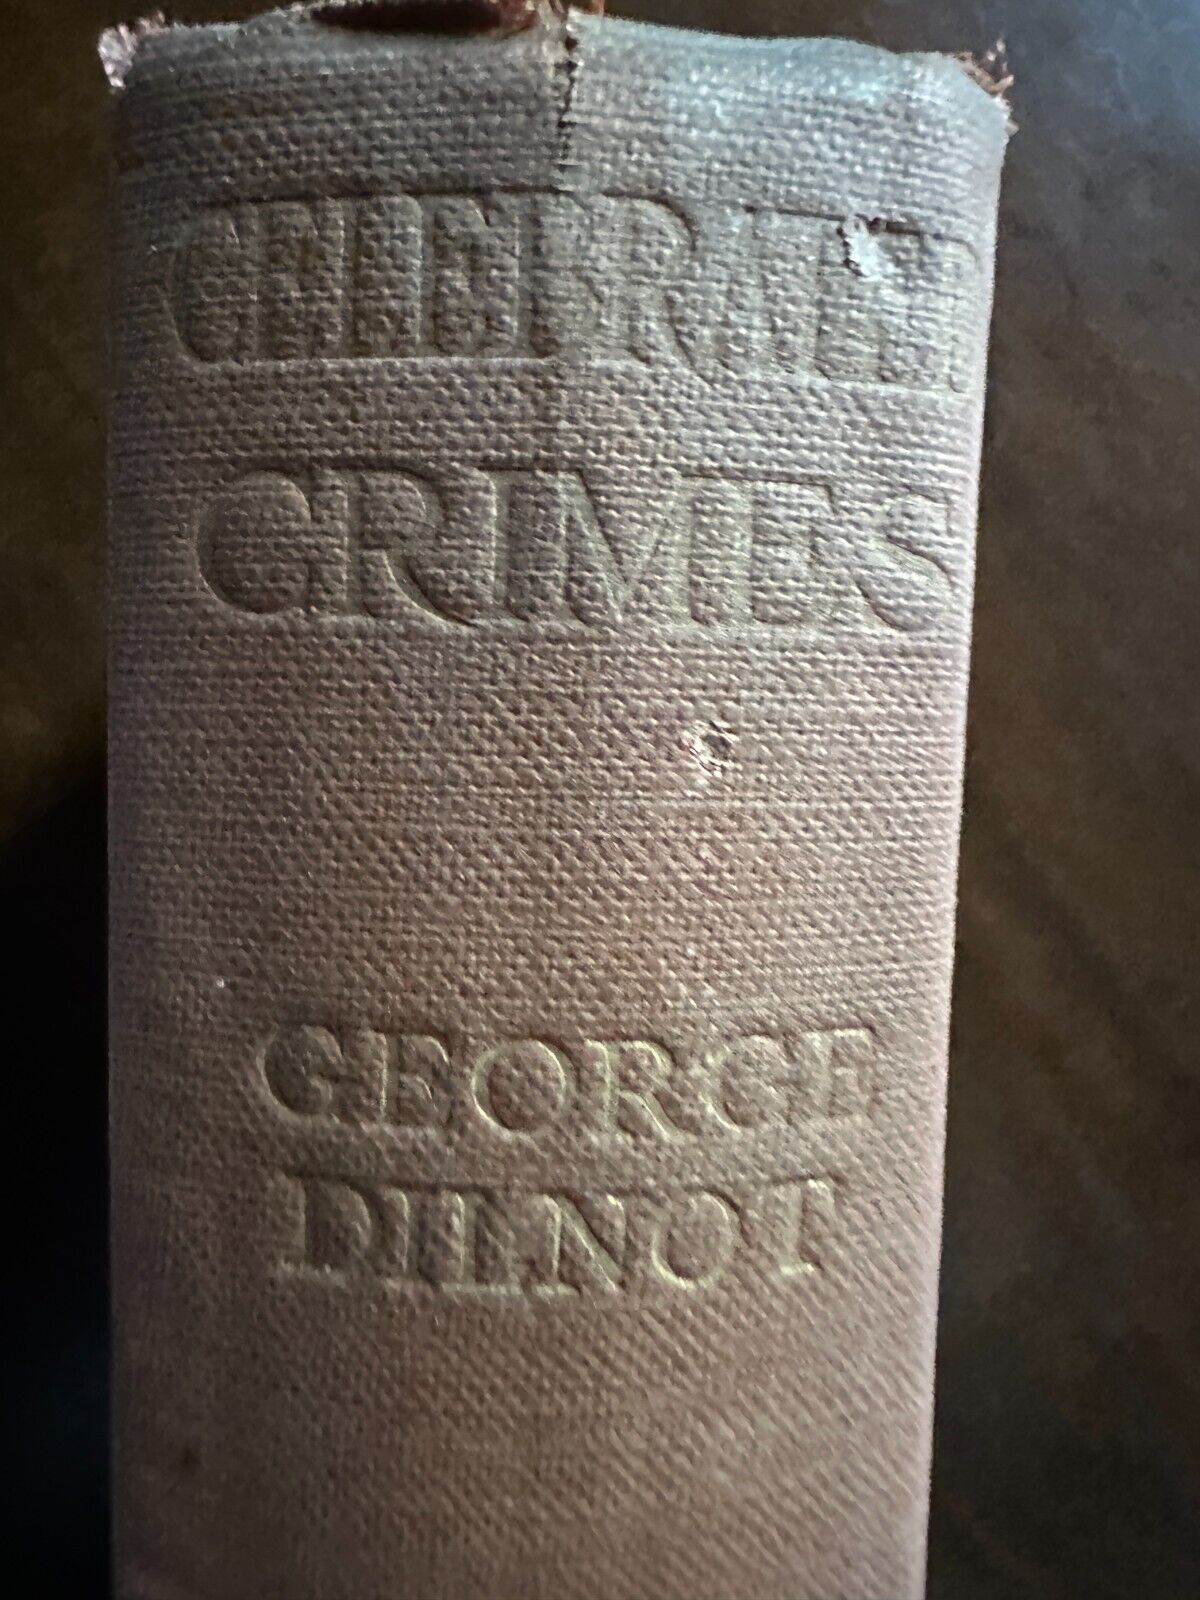 Celebrated Crimes by George Dilnot 1st Edition from 1925 VERY RARE